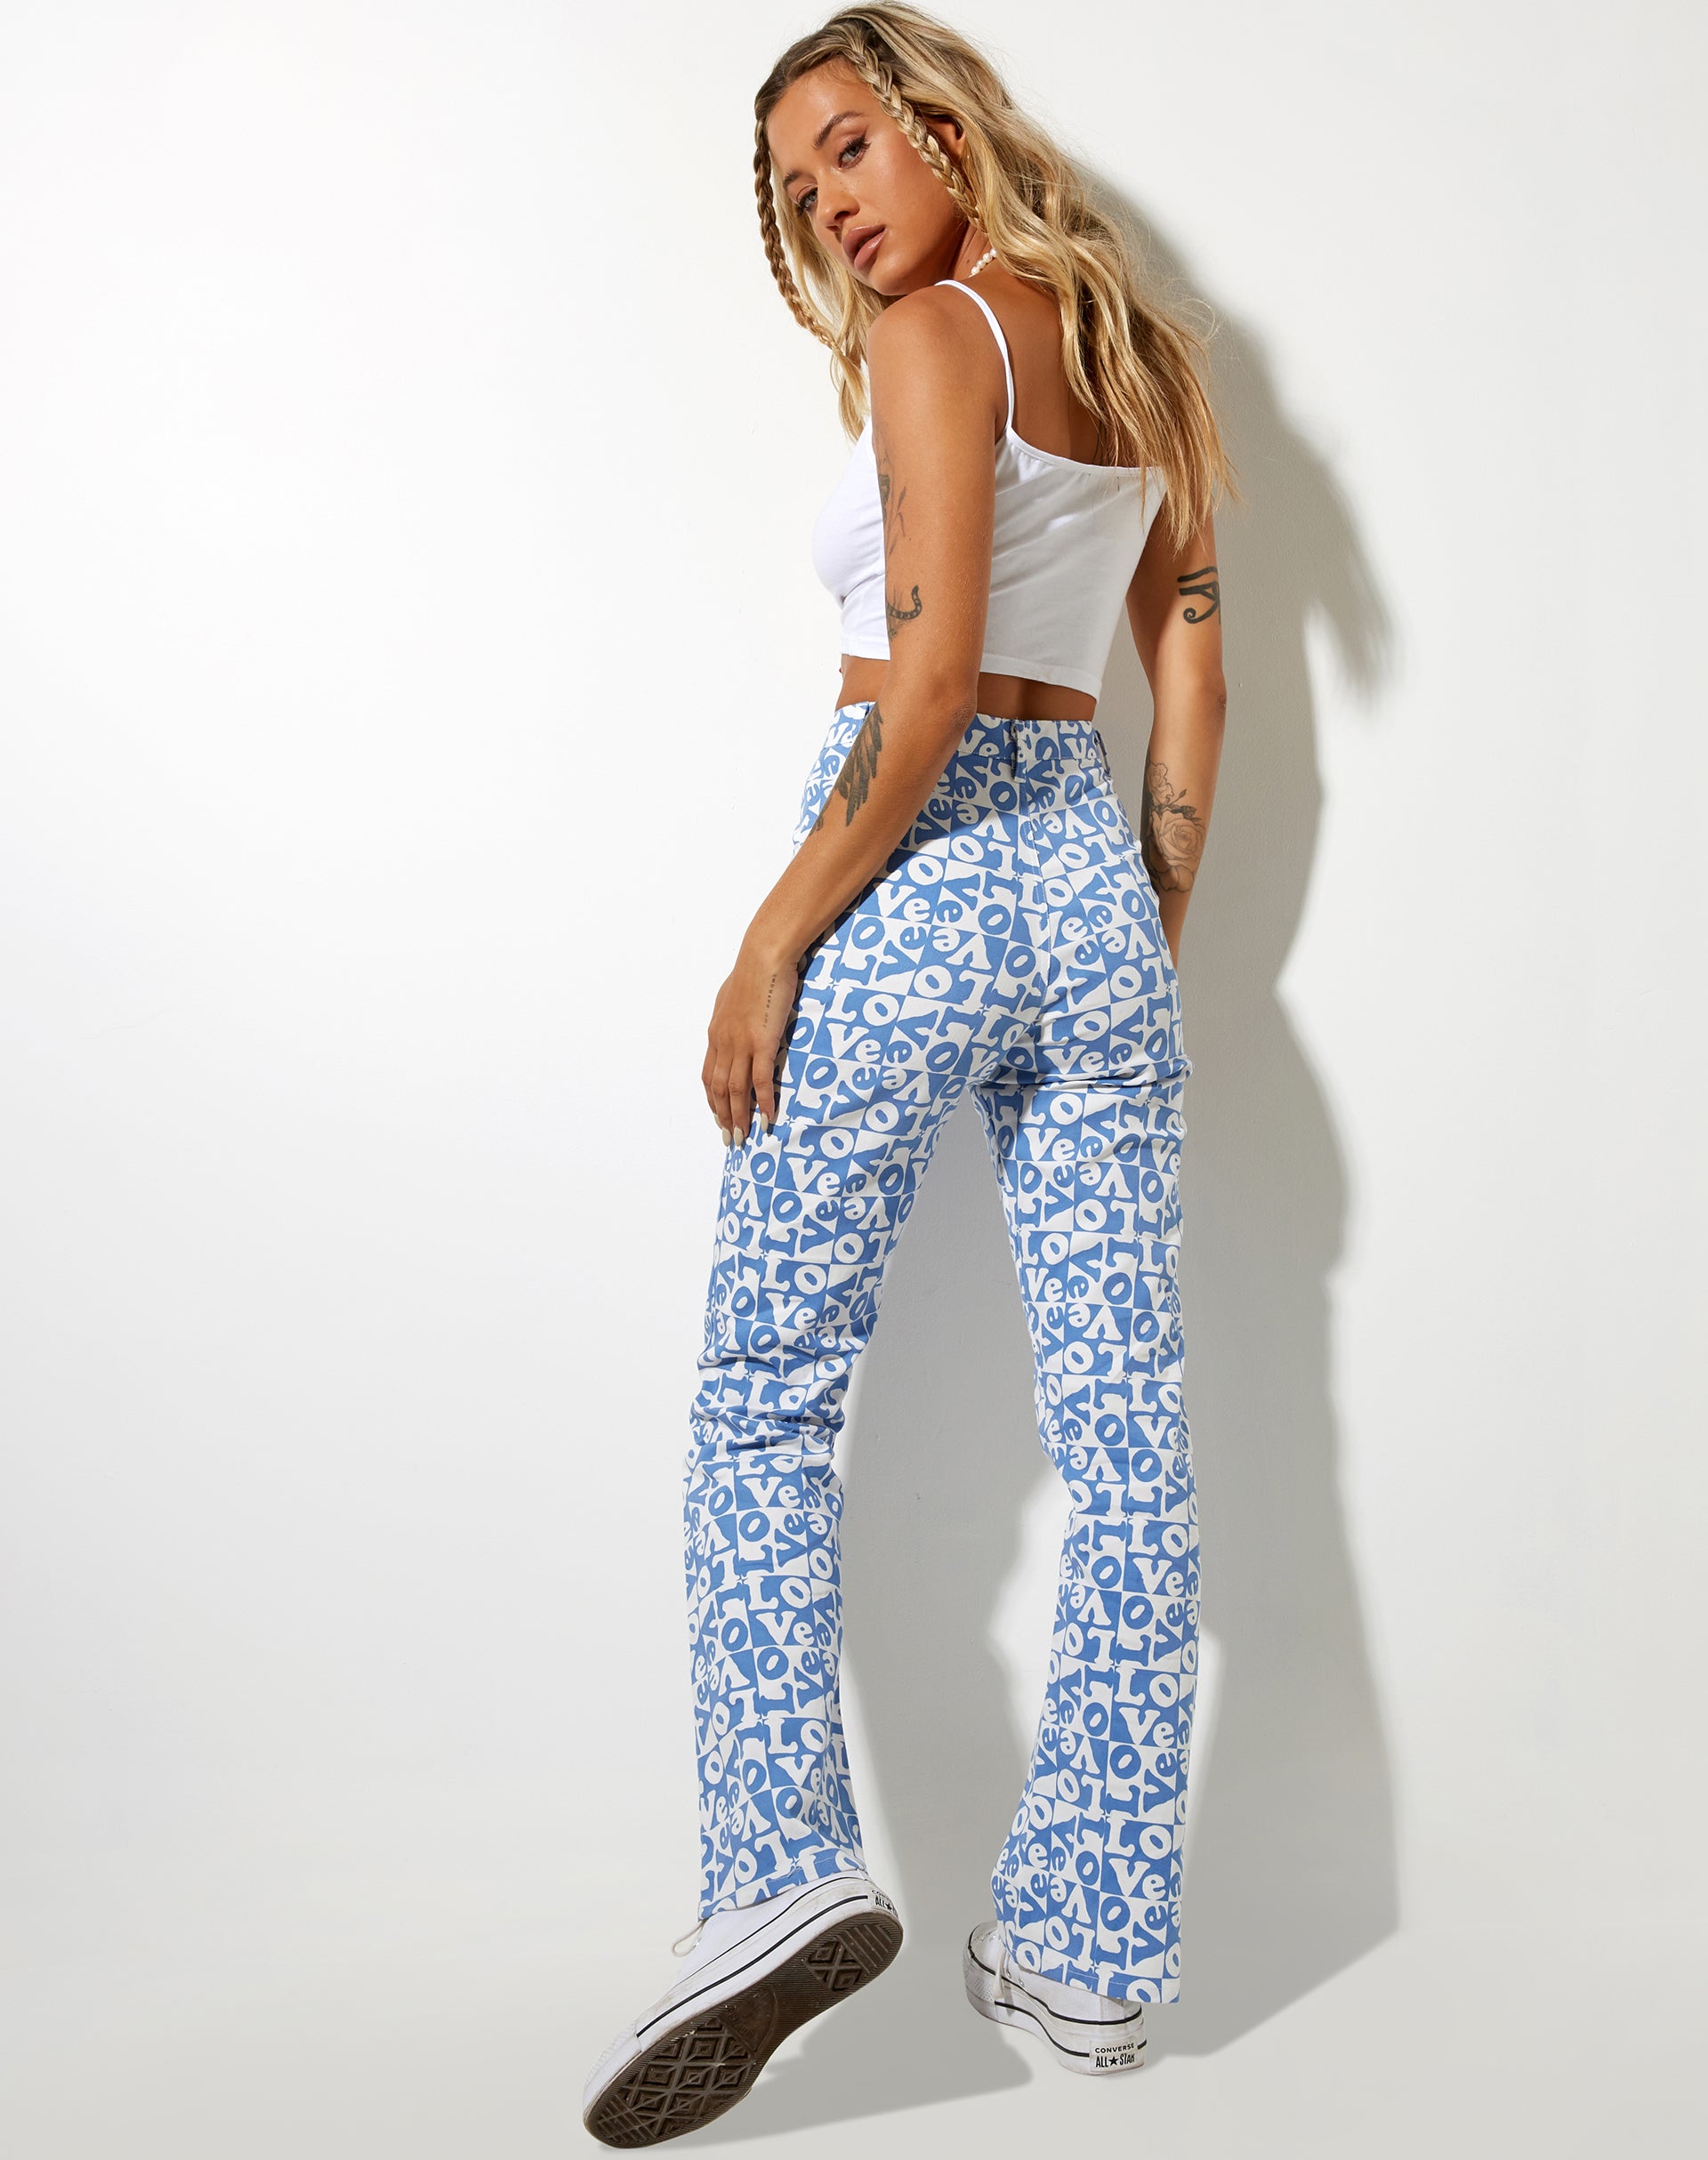 Image of Zoven Trouser in Love Checker Blue